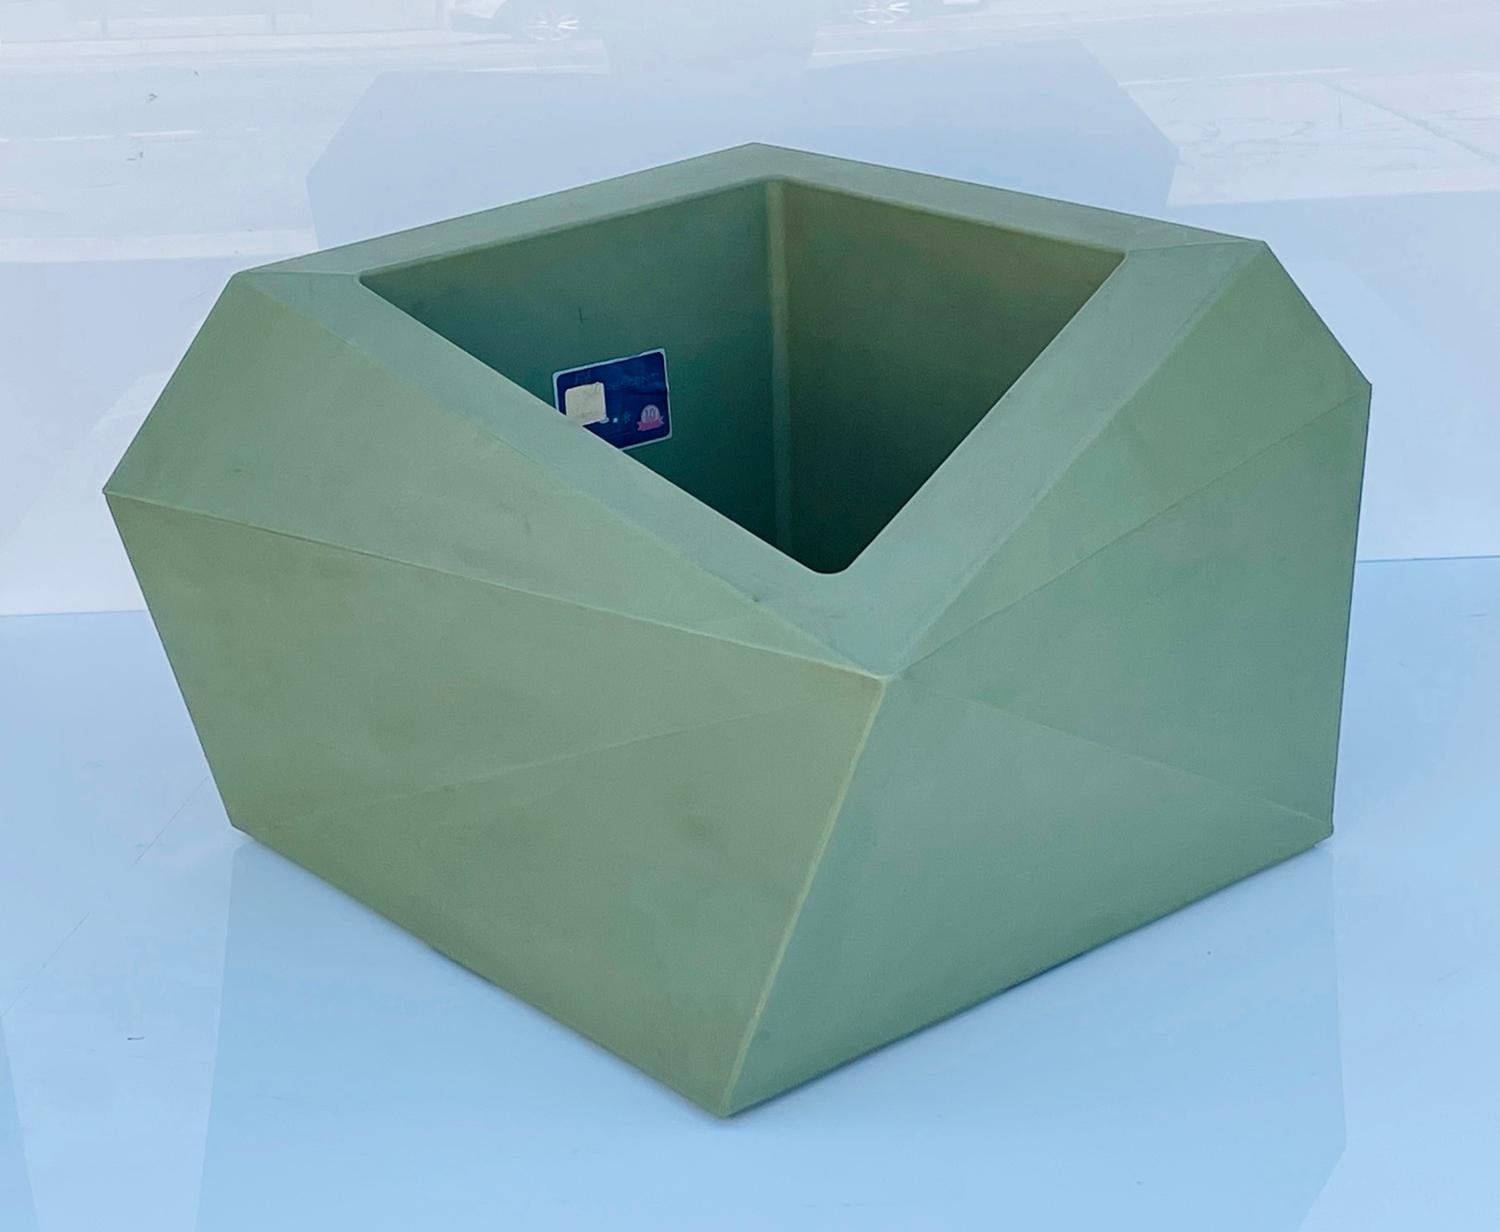 Incorporating modern architecture into a practical gardening essential, this faceted Planter will display beautifully in any room in your home.

The tall faceted planter lends itself effortlessly to sleek style, tying right into your current decor